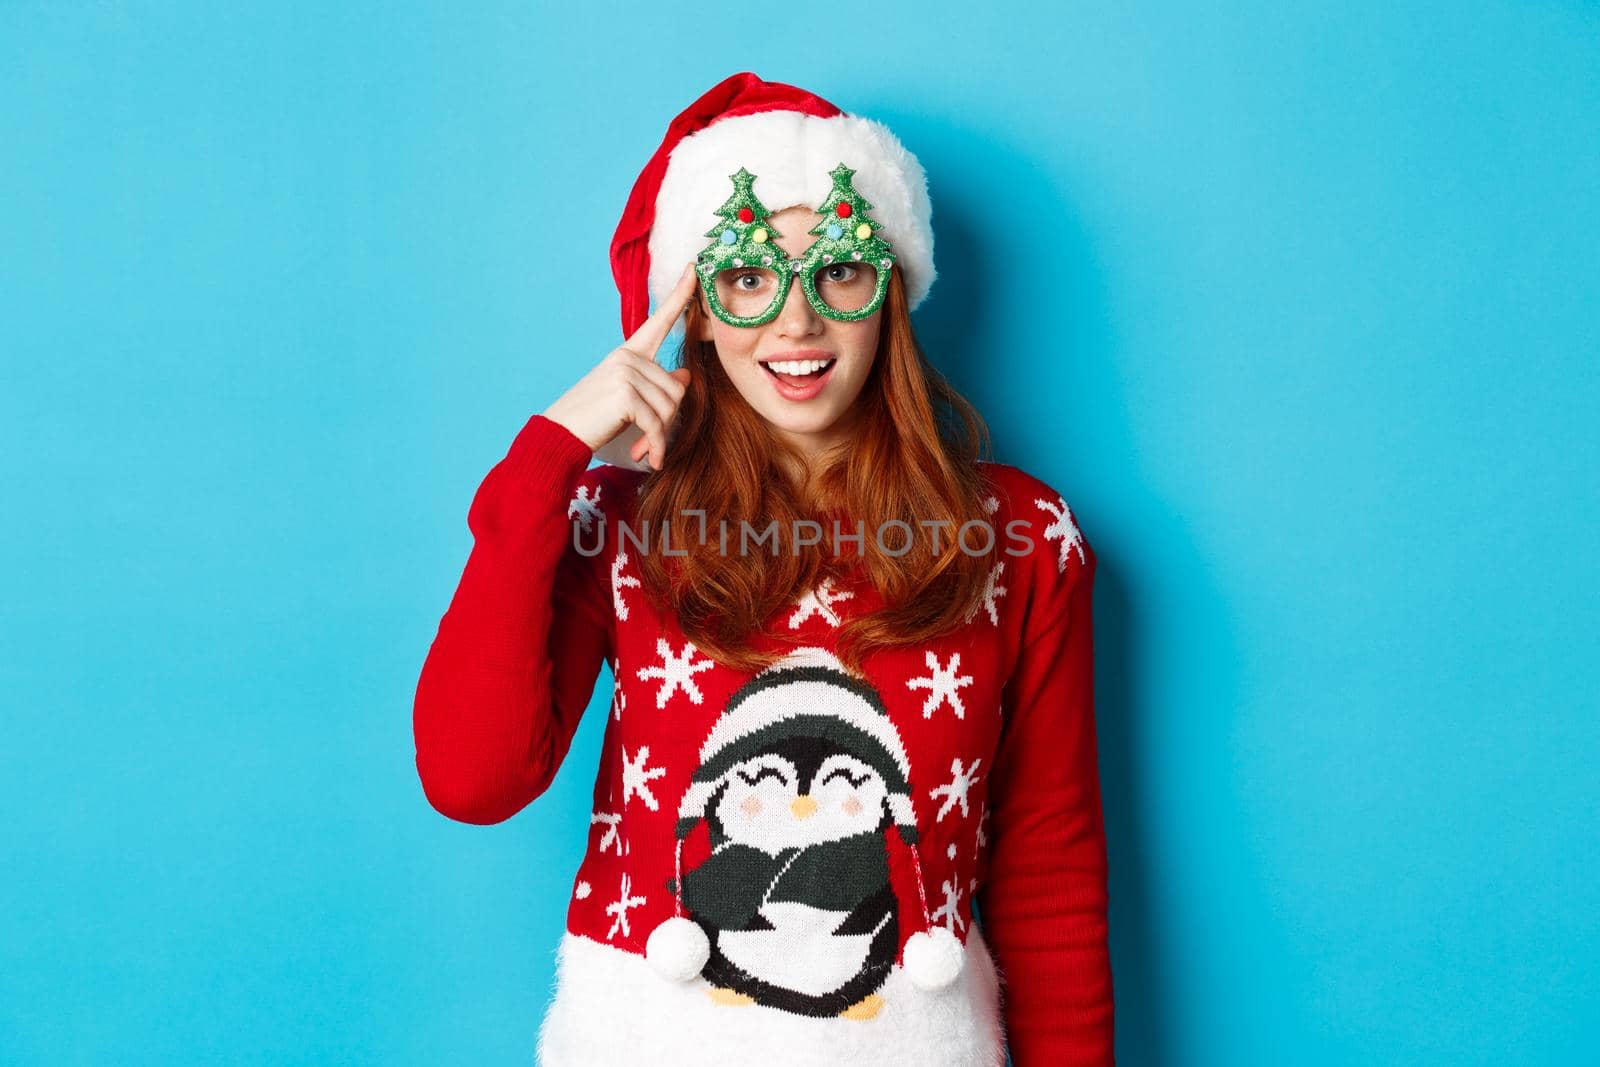 Happy holidays and Christmas concept. Funny redhead teen girl celebrating New Year, wearing santa hat and party glasses, standing against blue background.